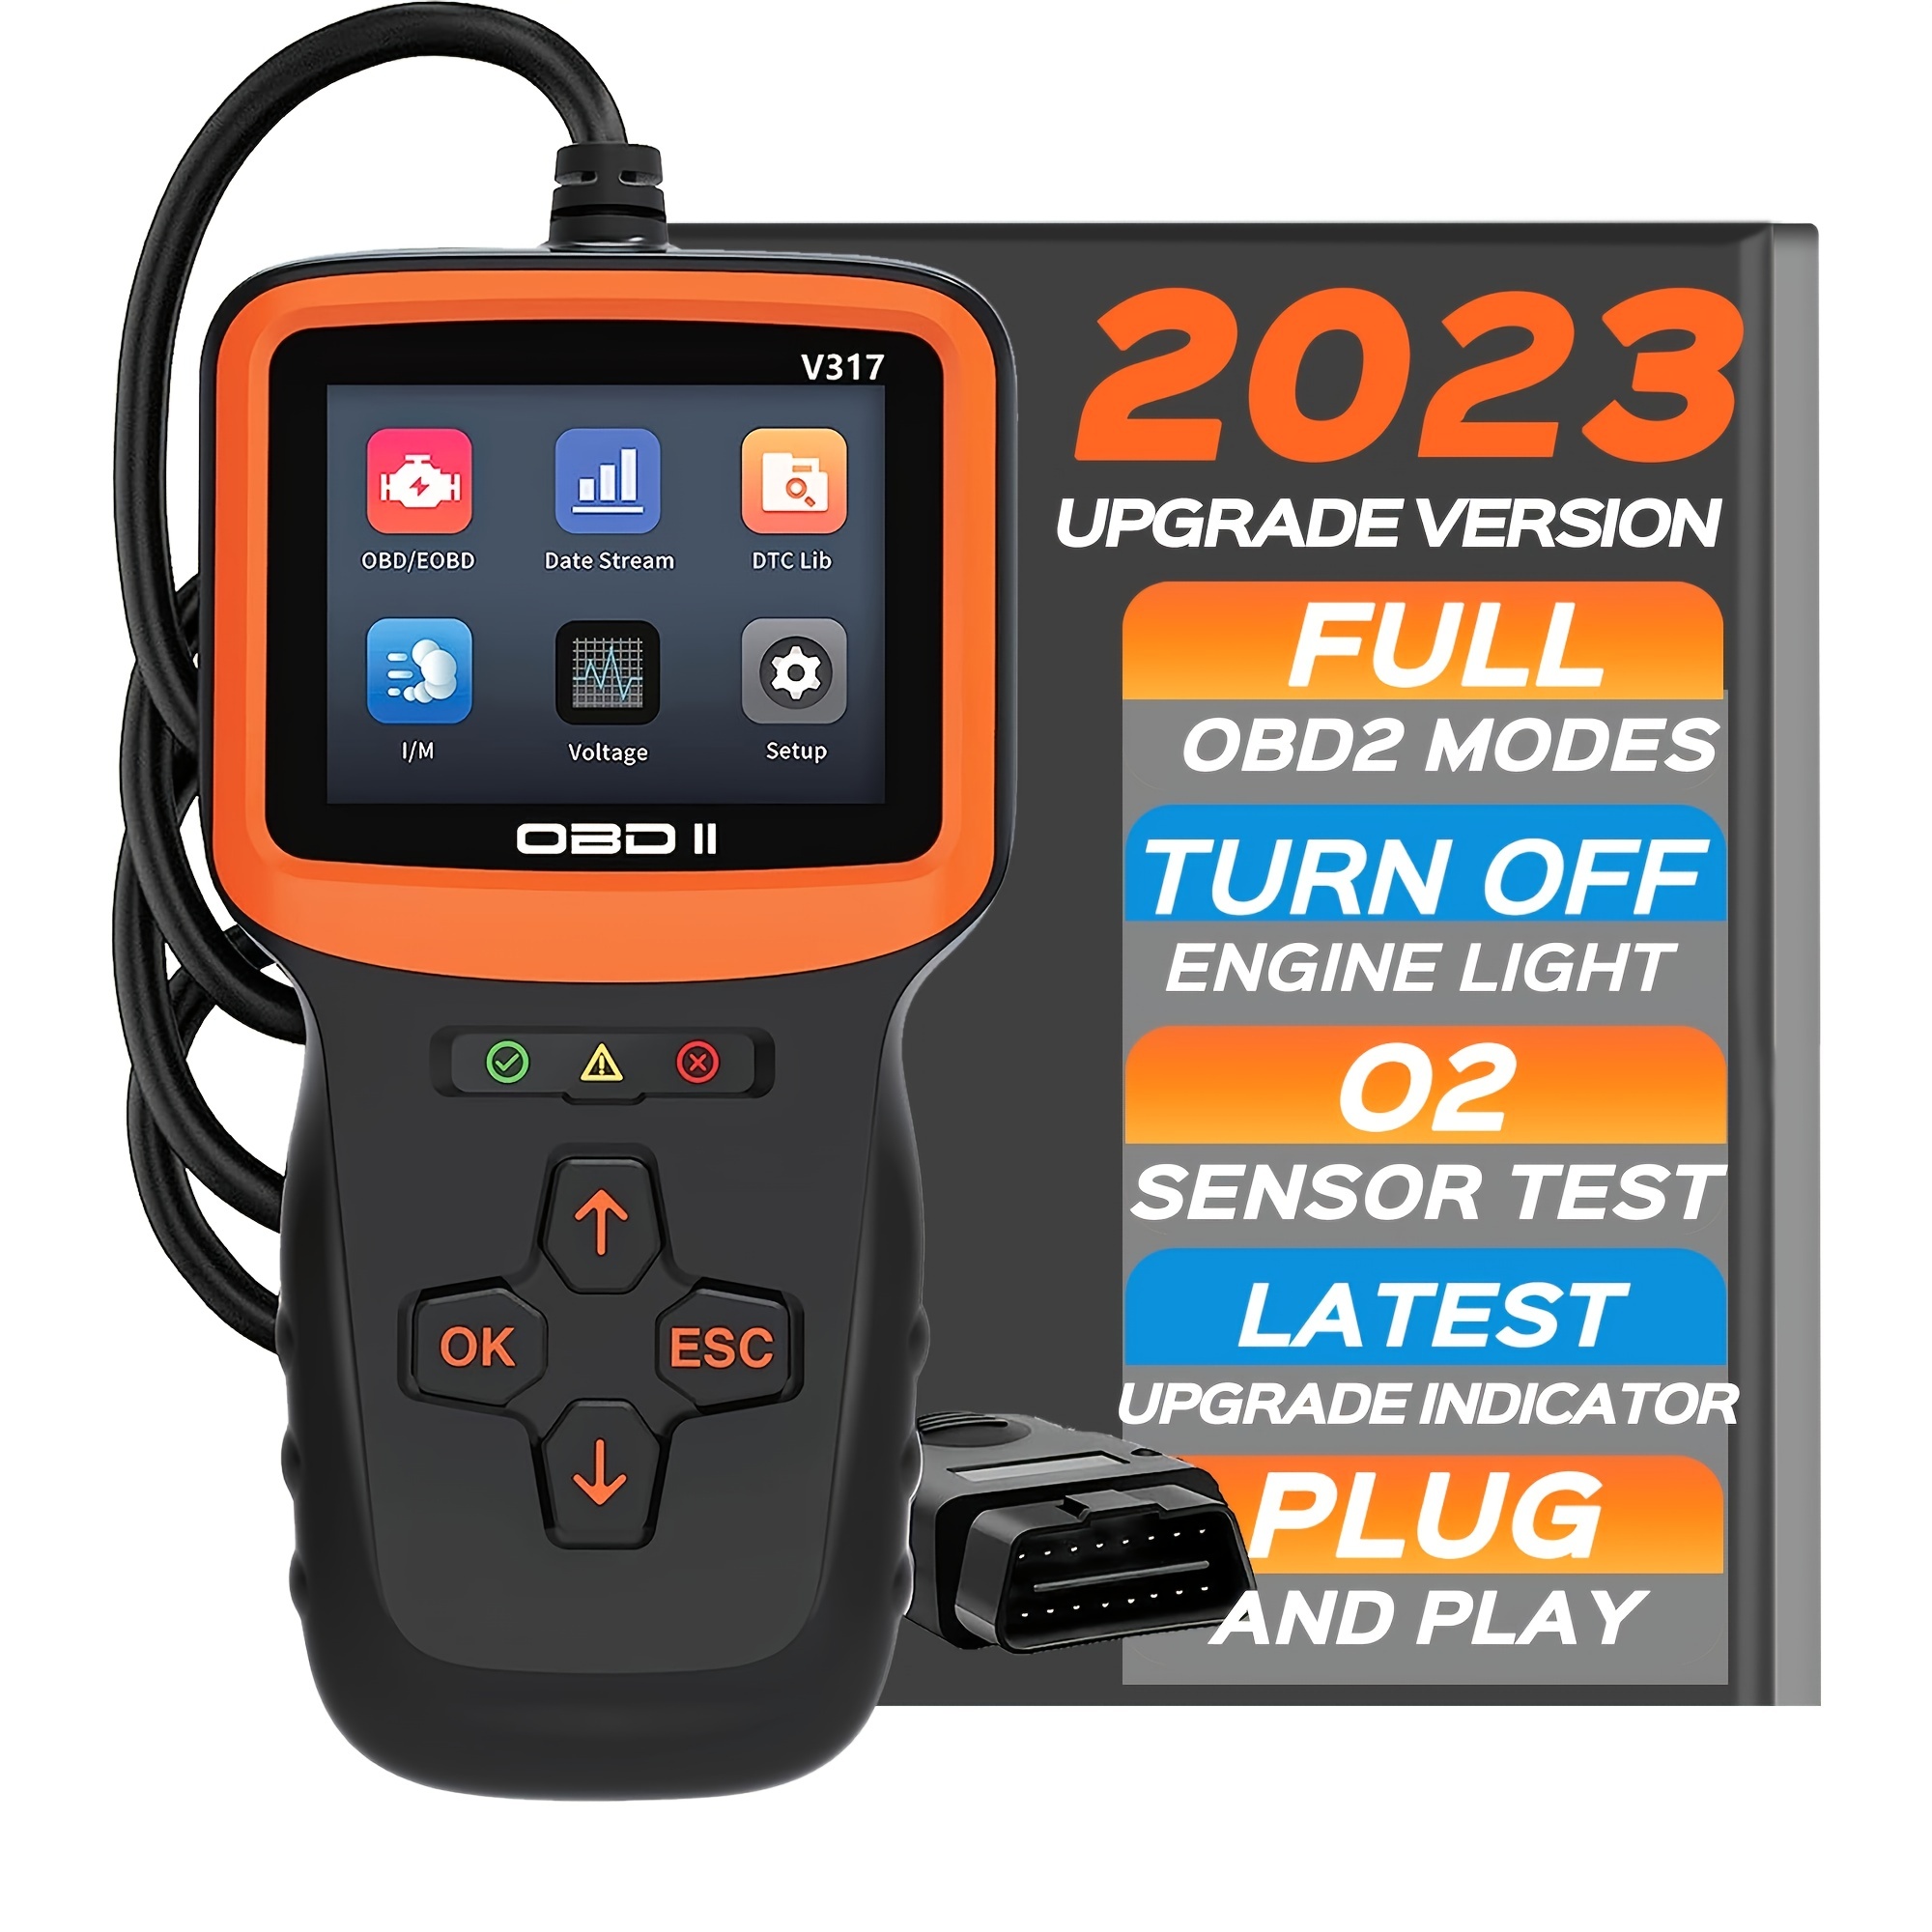  LAUNCH OBD2 Scanner CRP123E Elite Code Reader, 2024 Lifetime  Free Update Car Diagnostic Tool for ABS SRS Engine Transmission with Oil  Reset, SAS Reset, Throttle Adaptation, Battery Test, Auto VIN 